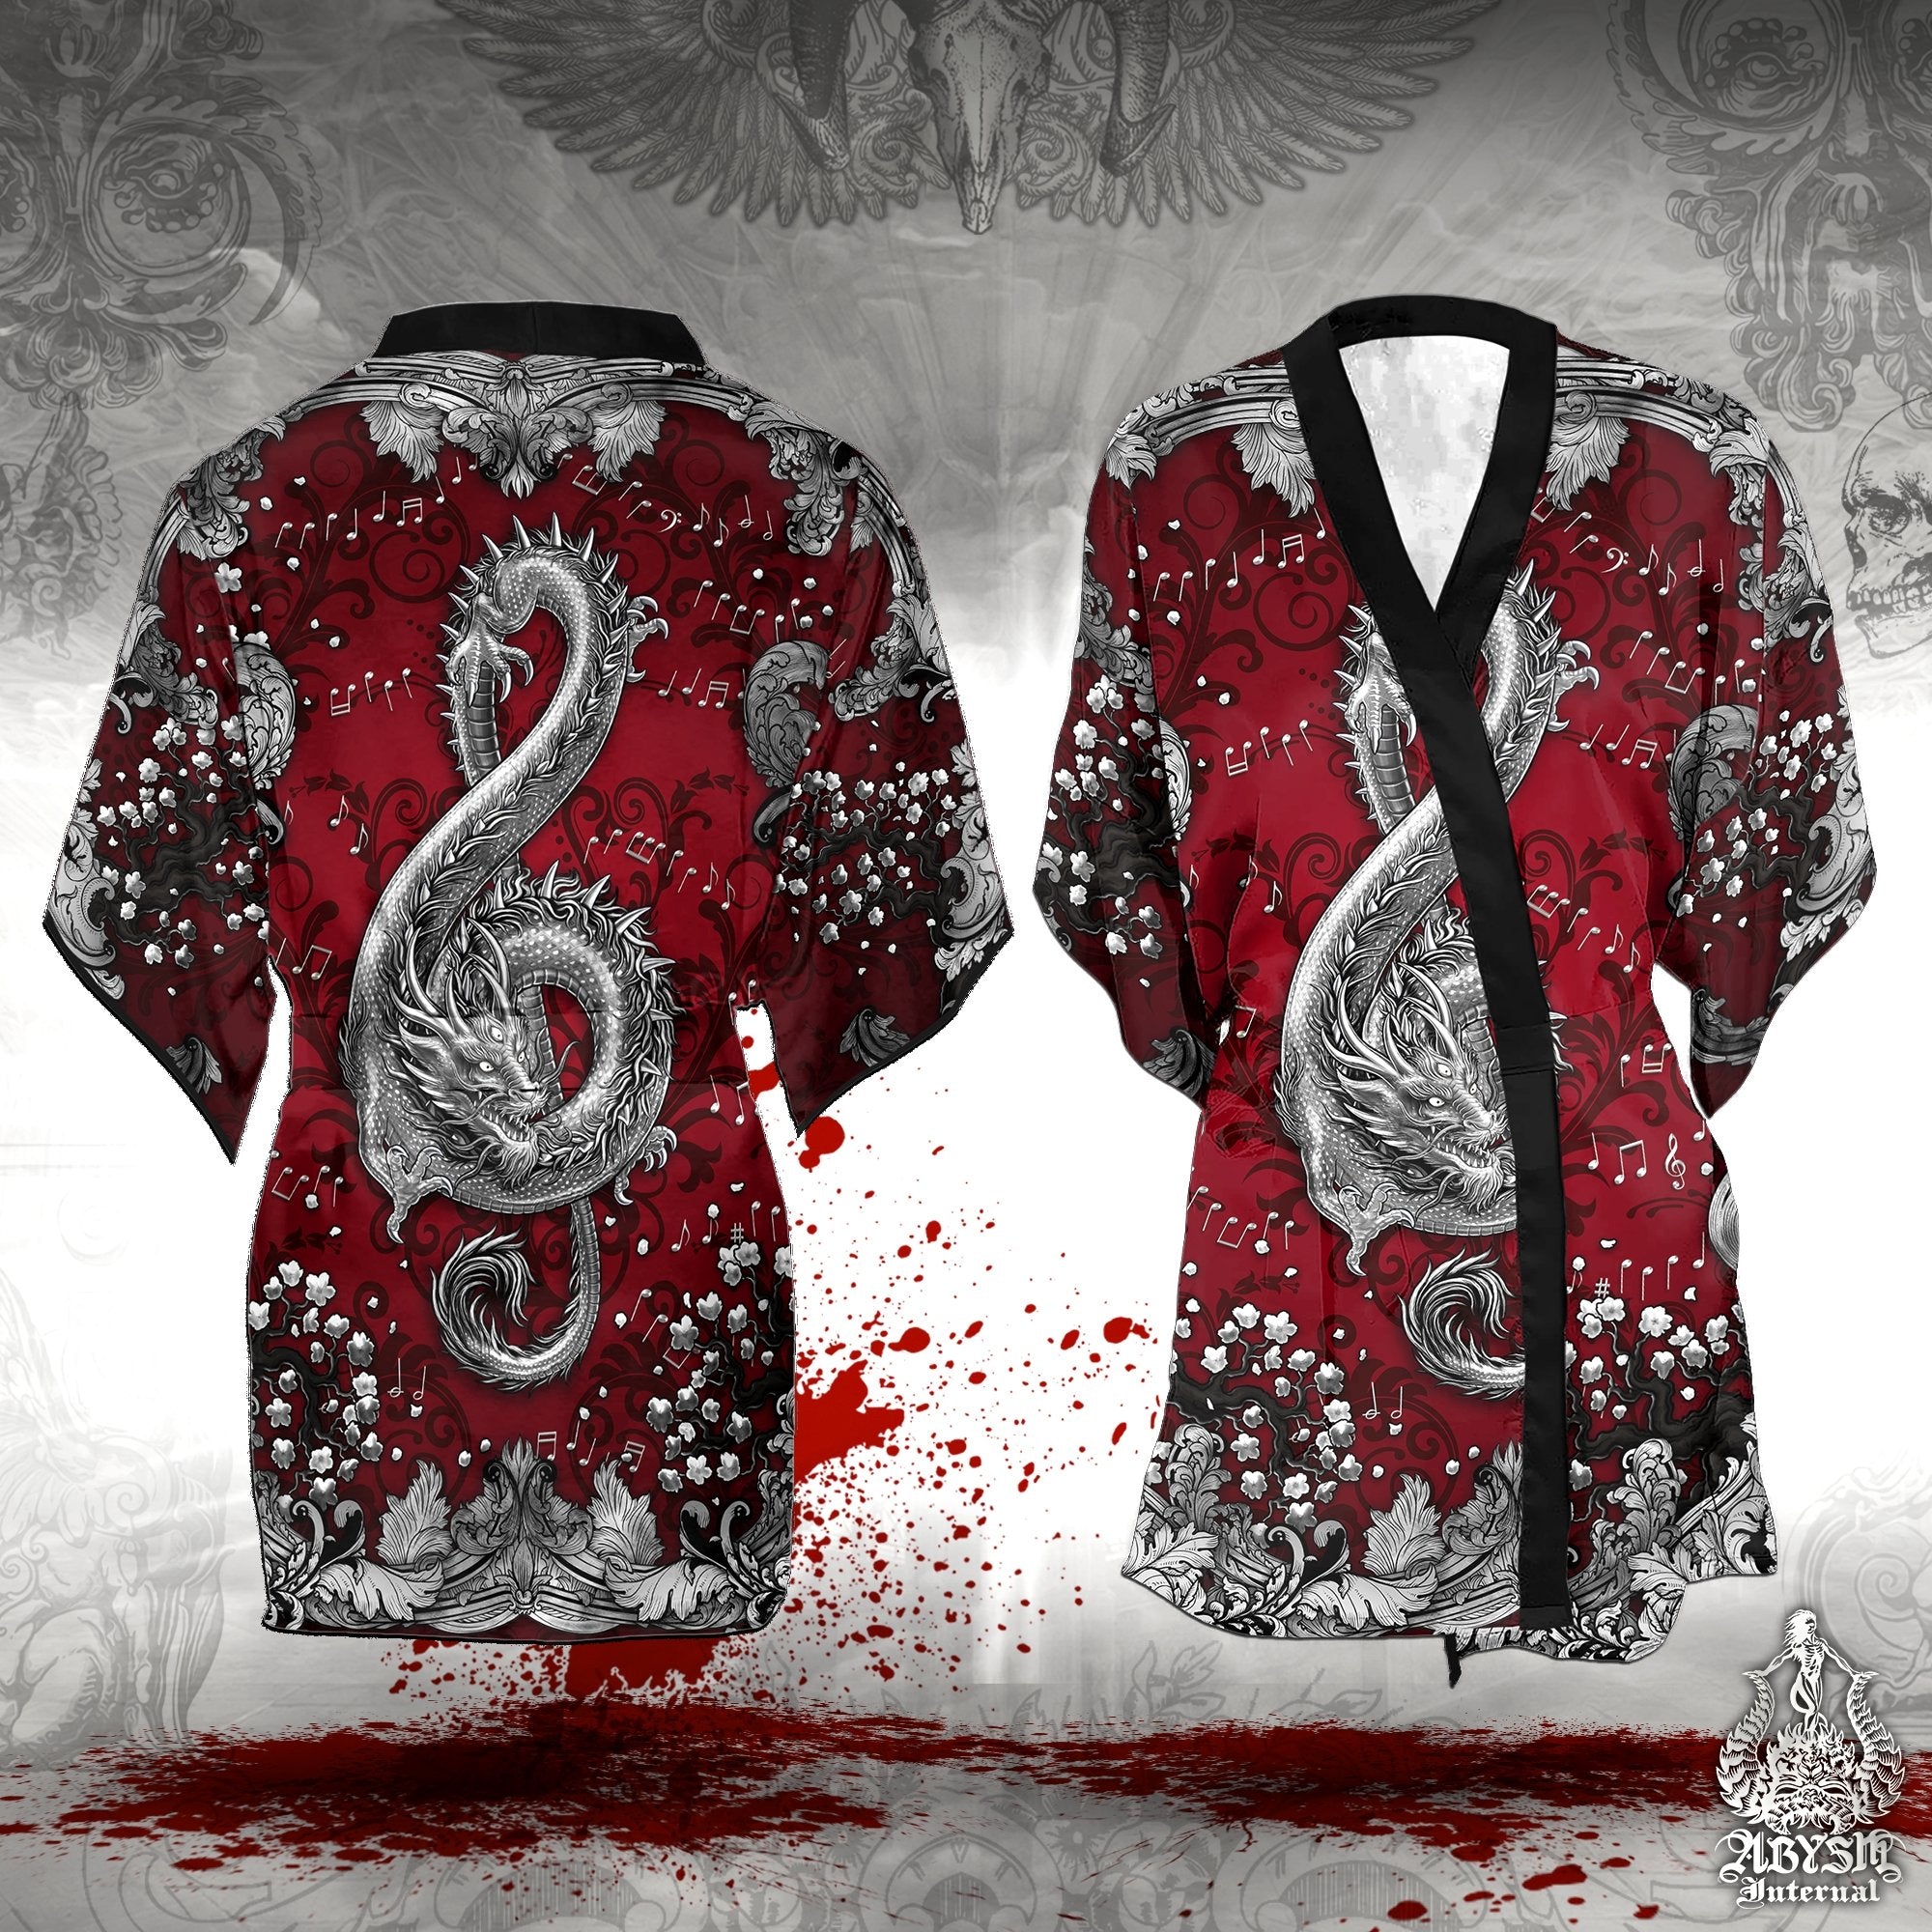 Music Short Kimono Robe, Beach Party Outfit, Coverup, Summer Festival,  Indie and Alternative Clothing, Unisex - Dragon, Silver Red